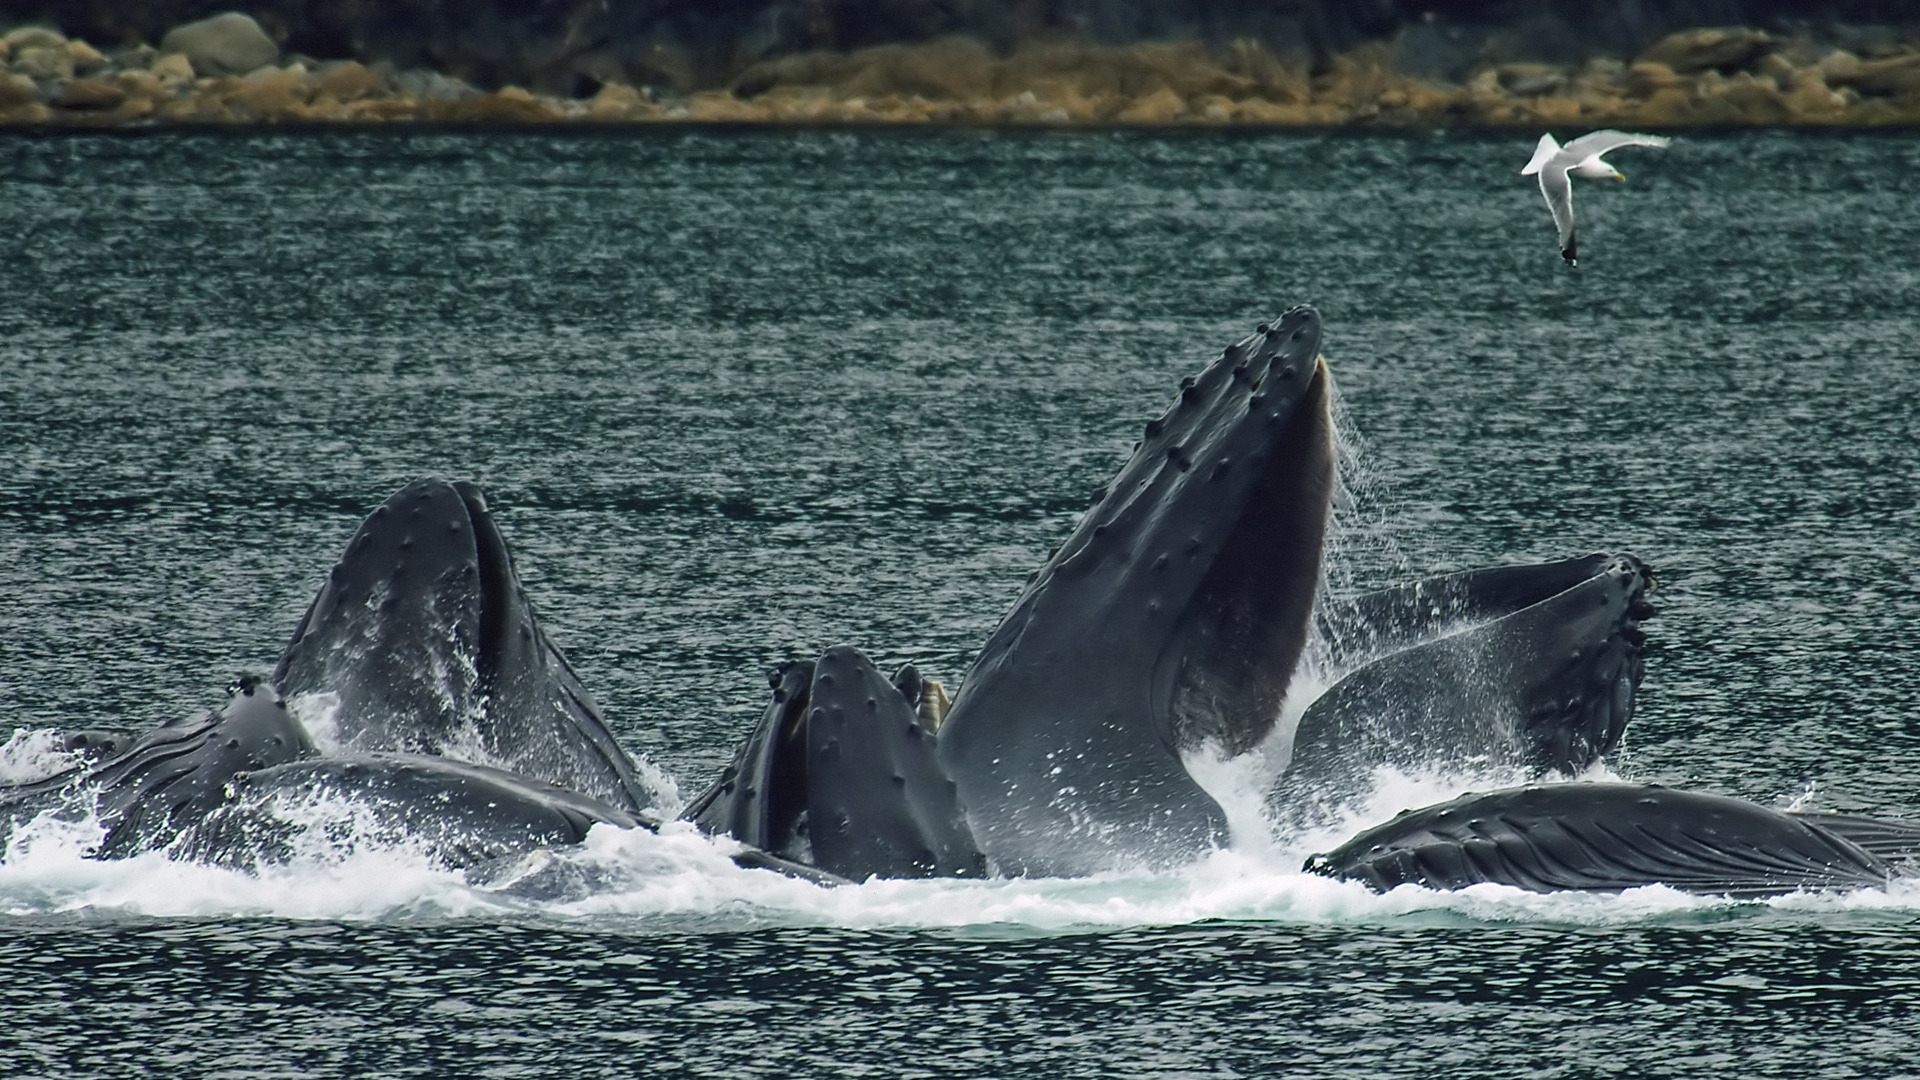 Whales bubble net feeding for 1920 x 1080 HDTV 1080p resolution